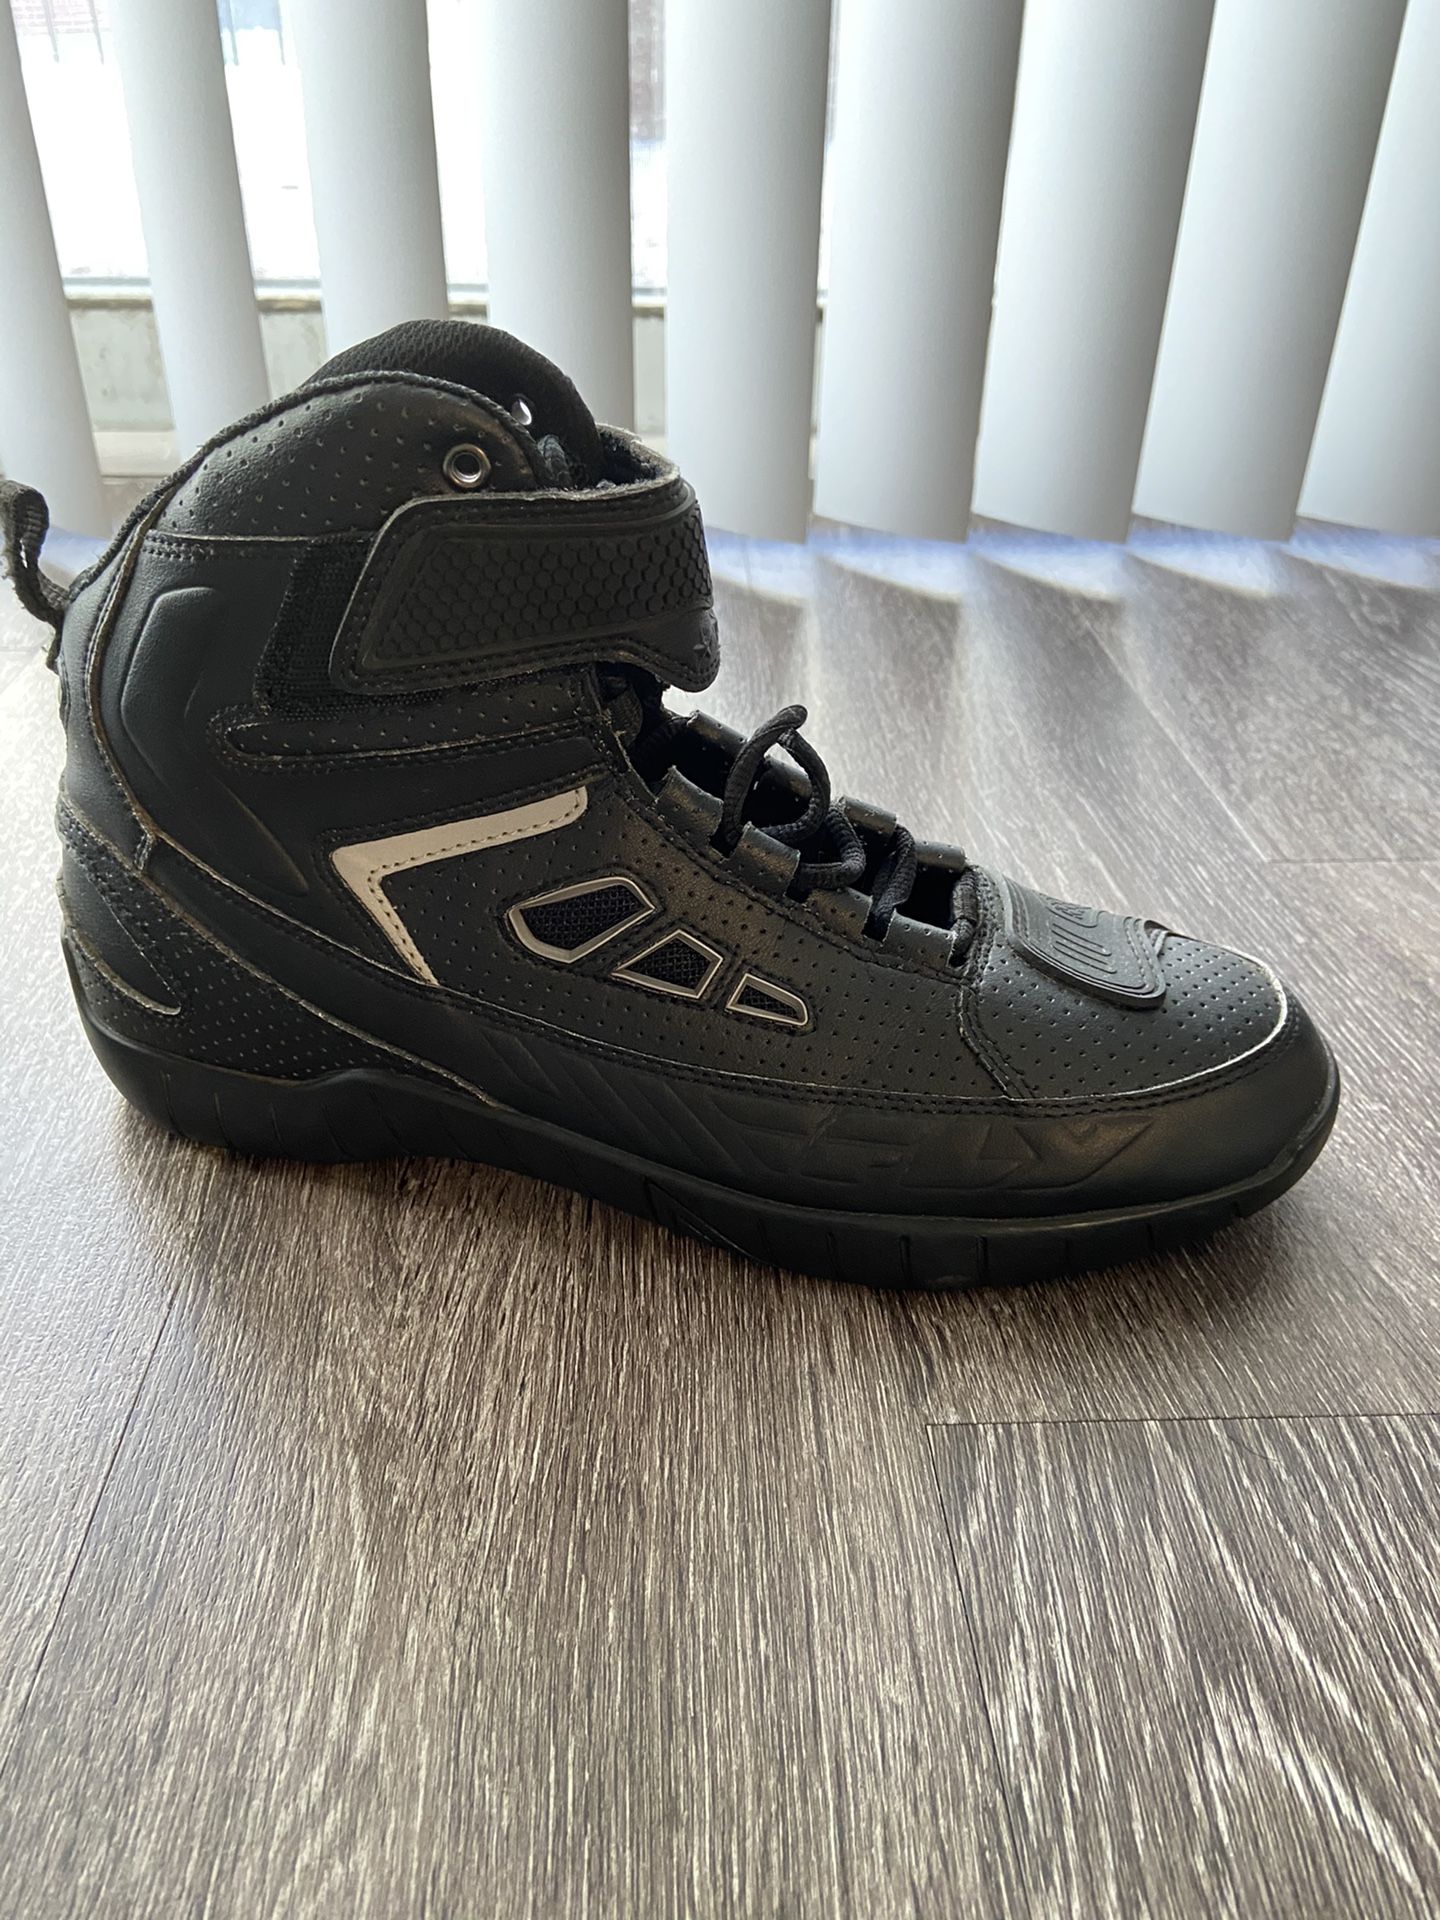 Fly Racing motorcycle riding shoes size 11